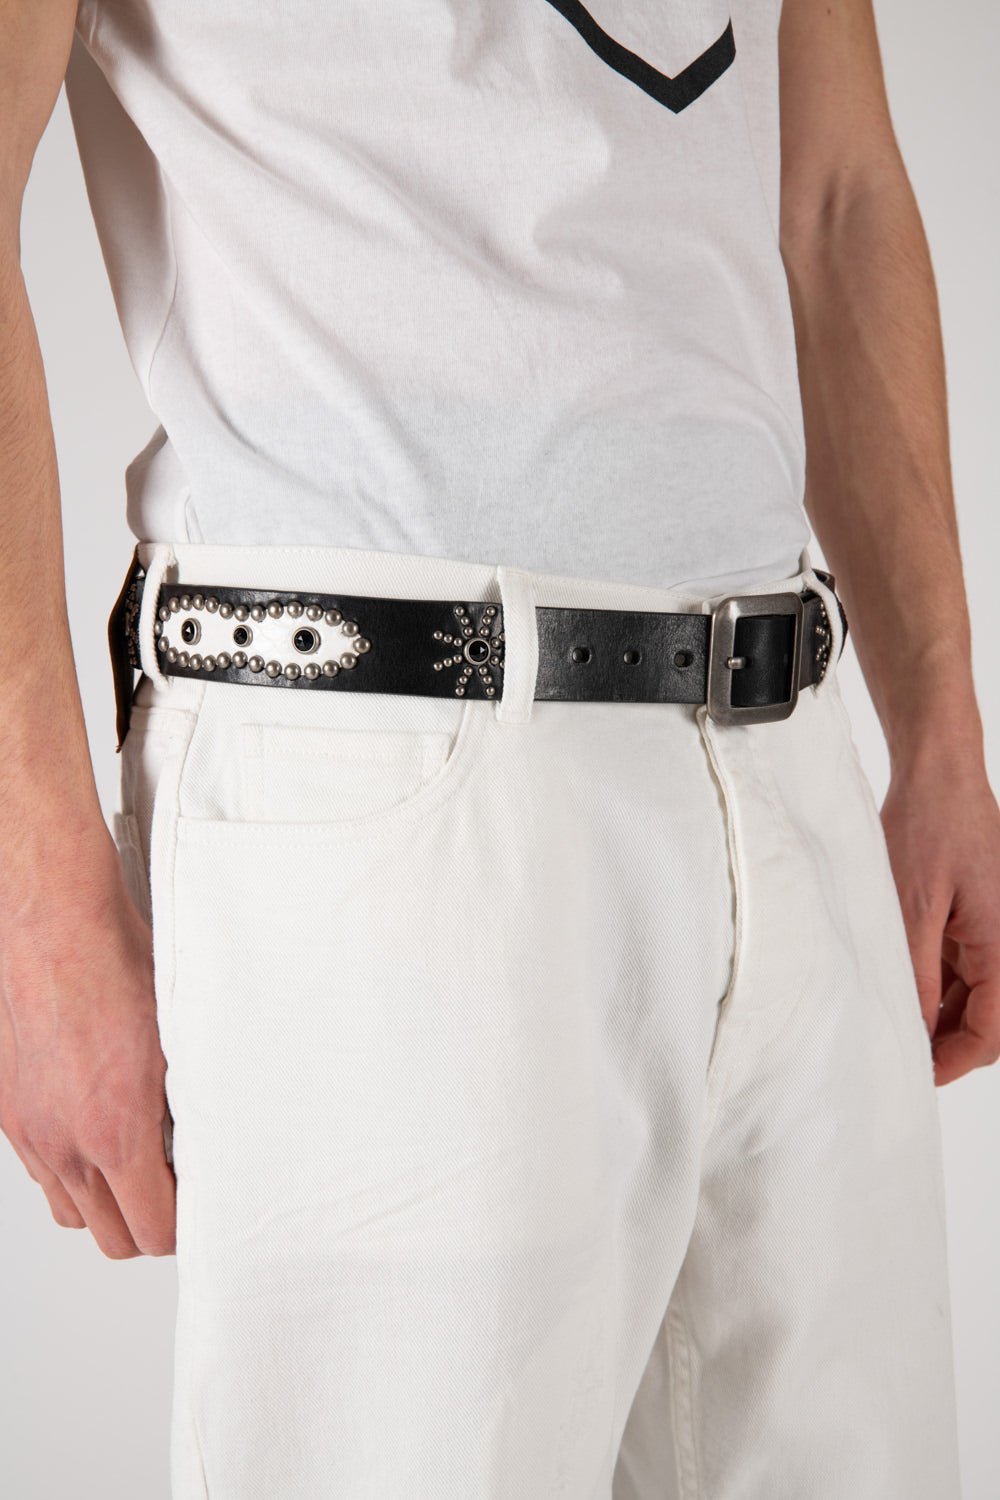 MARLENA BELT Black leather belt with studs and rhinestones. Squared buckle. Height: 3,5 cm. Made in Italy. HTC LOS ANGELES